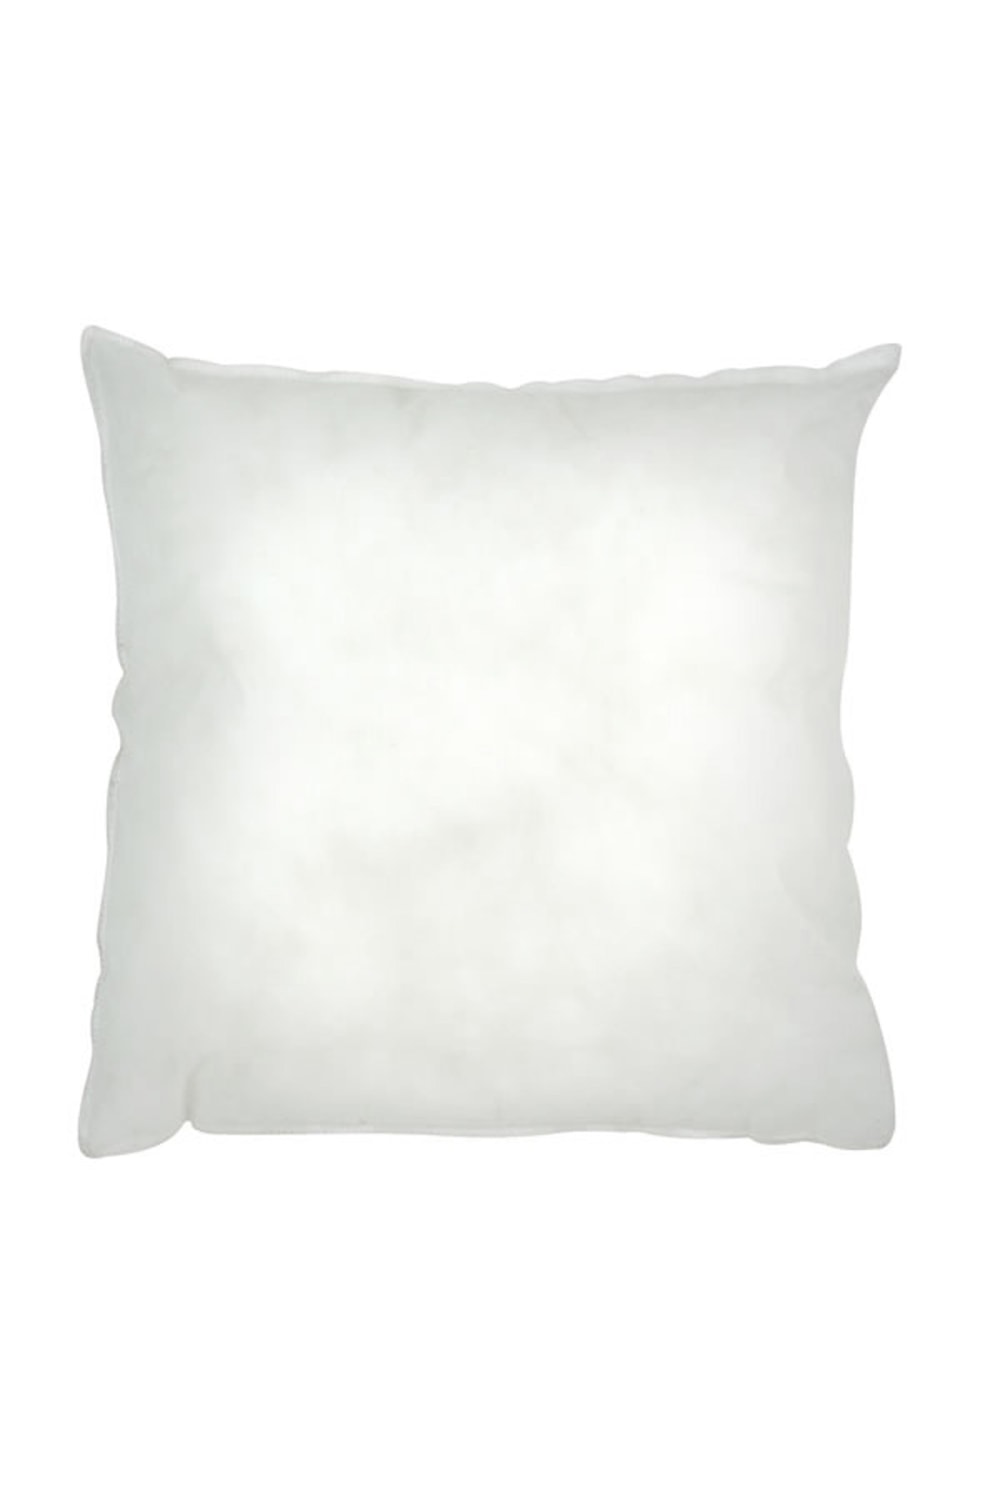 Riva Home Polyester Cushion Pad (White) (12 x 20 inch)